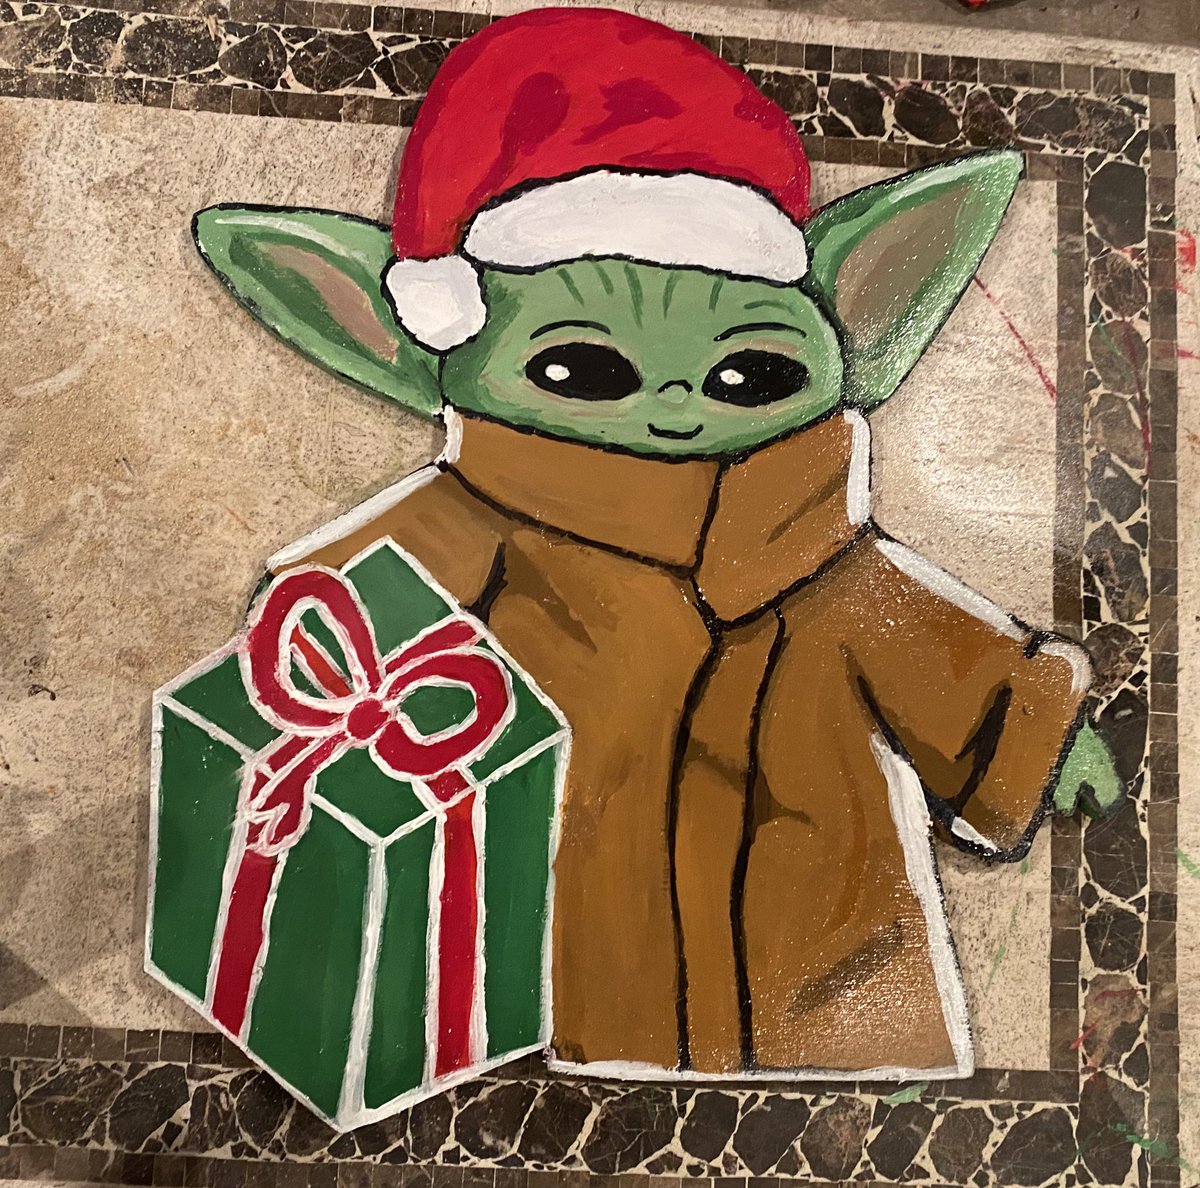 Just finished my Grogu Christmas cutout. It’s going in my front yard with some other characters I made @themandalorian @starwars @GeorgeLucasILM #starwars #Christmas #StarWarsfanart #thechild #mandolorian #ChristmasDecoration